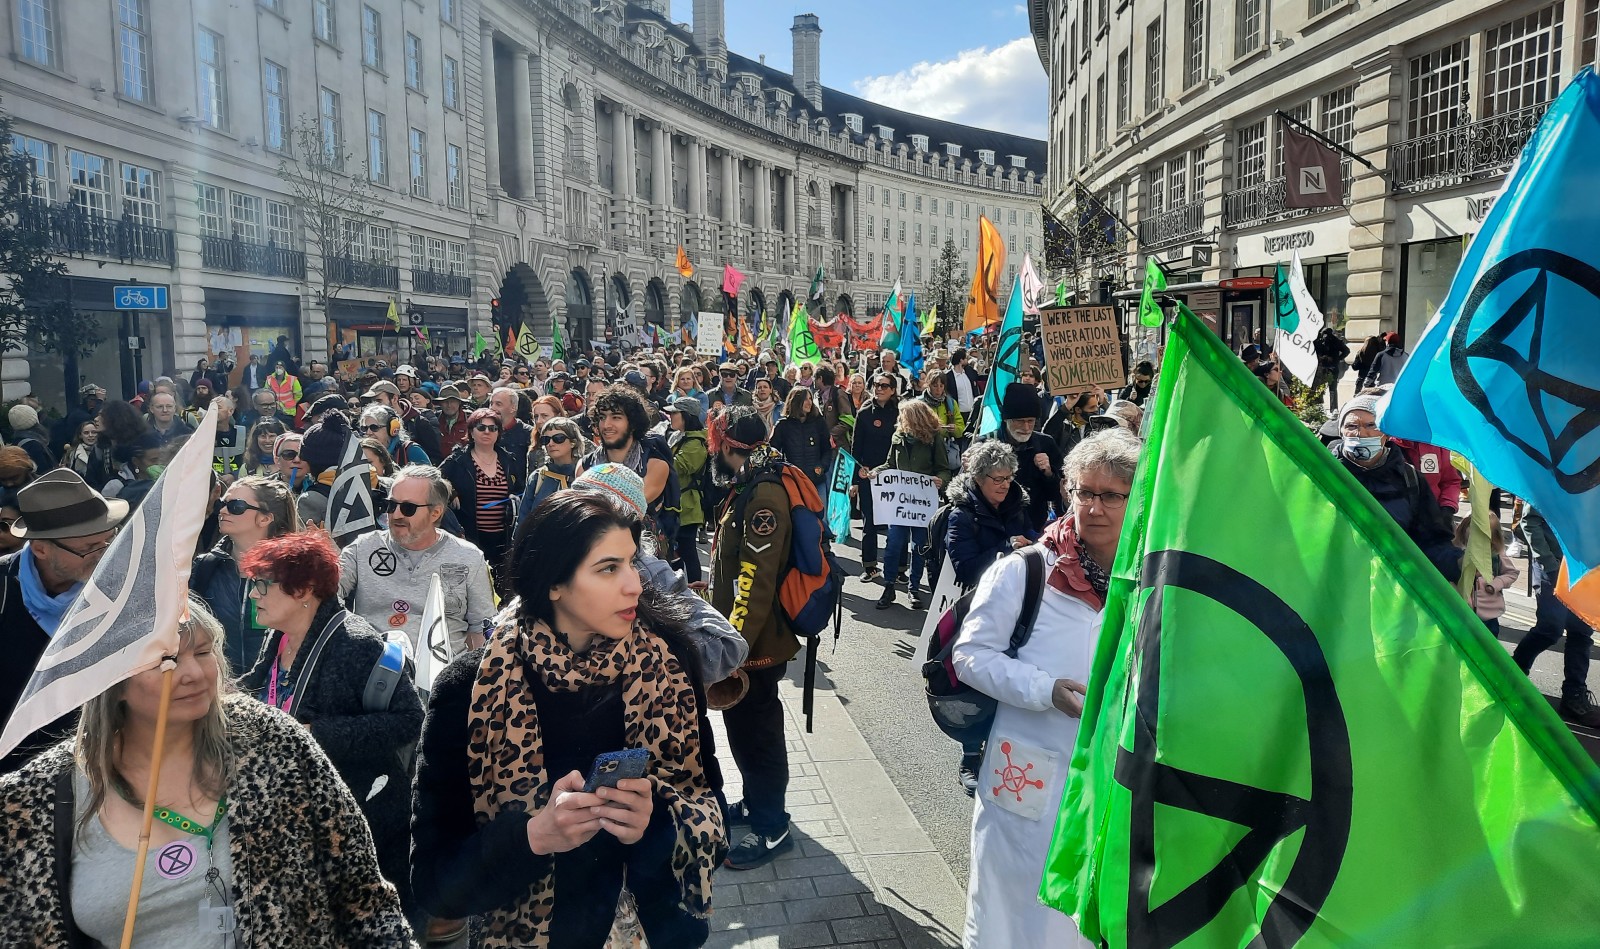 A photo of a London street full of Extinction Rebellion protesters with placards and flags